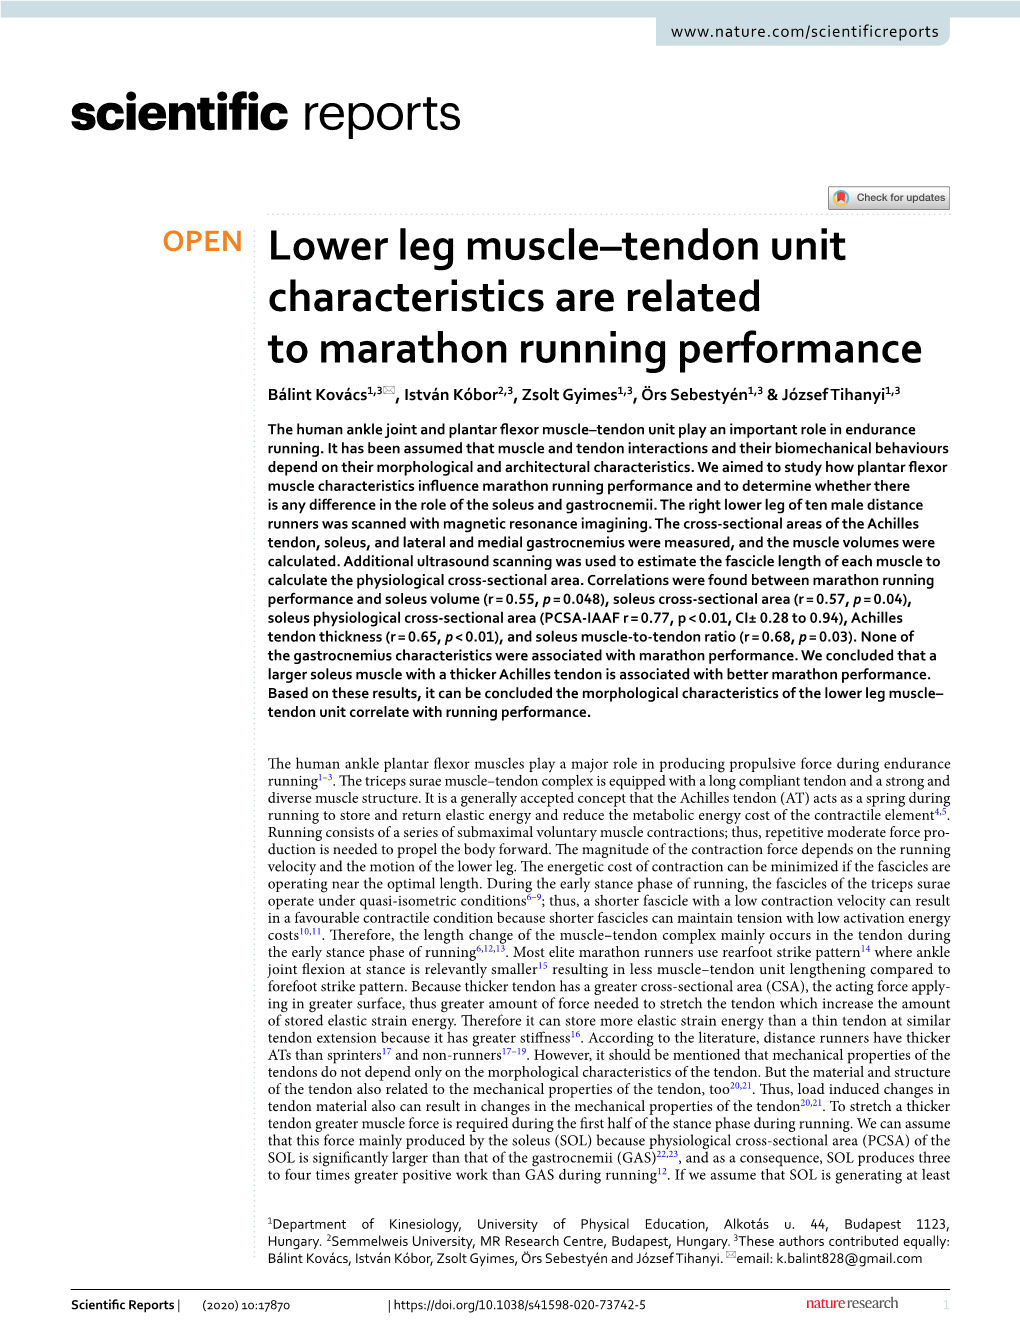 Lower Leg Muscle–Tendon Unit Characteristics Are Related